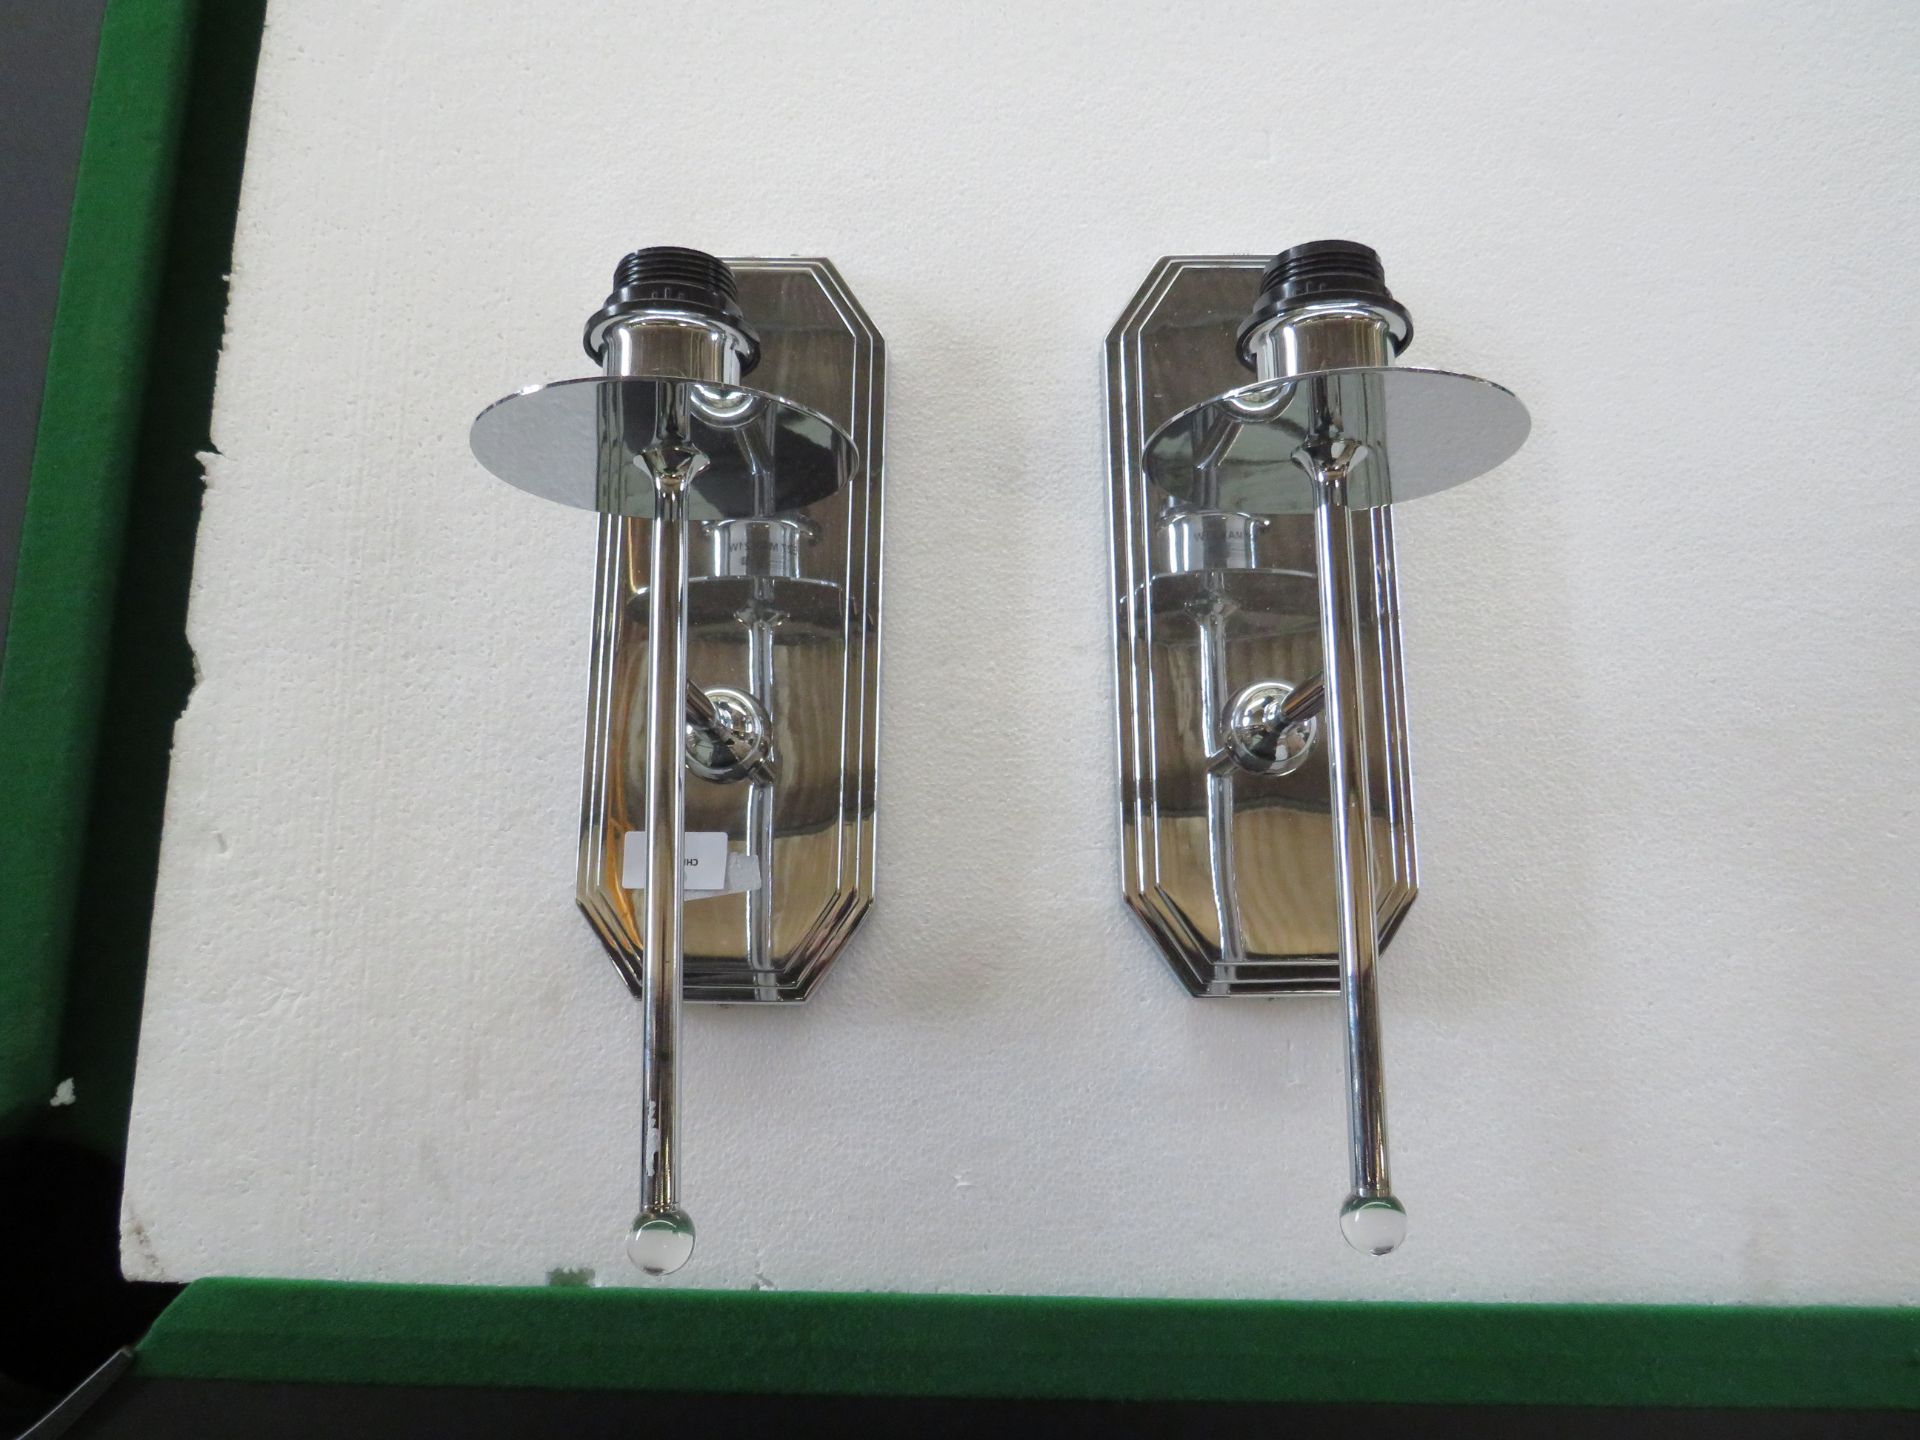 Chelsom - Set of 2 Chrome Wall Lights - Good Condition, No Packaging.